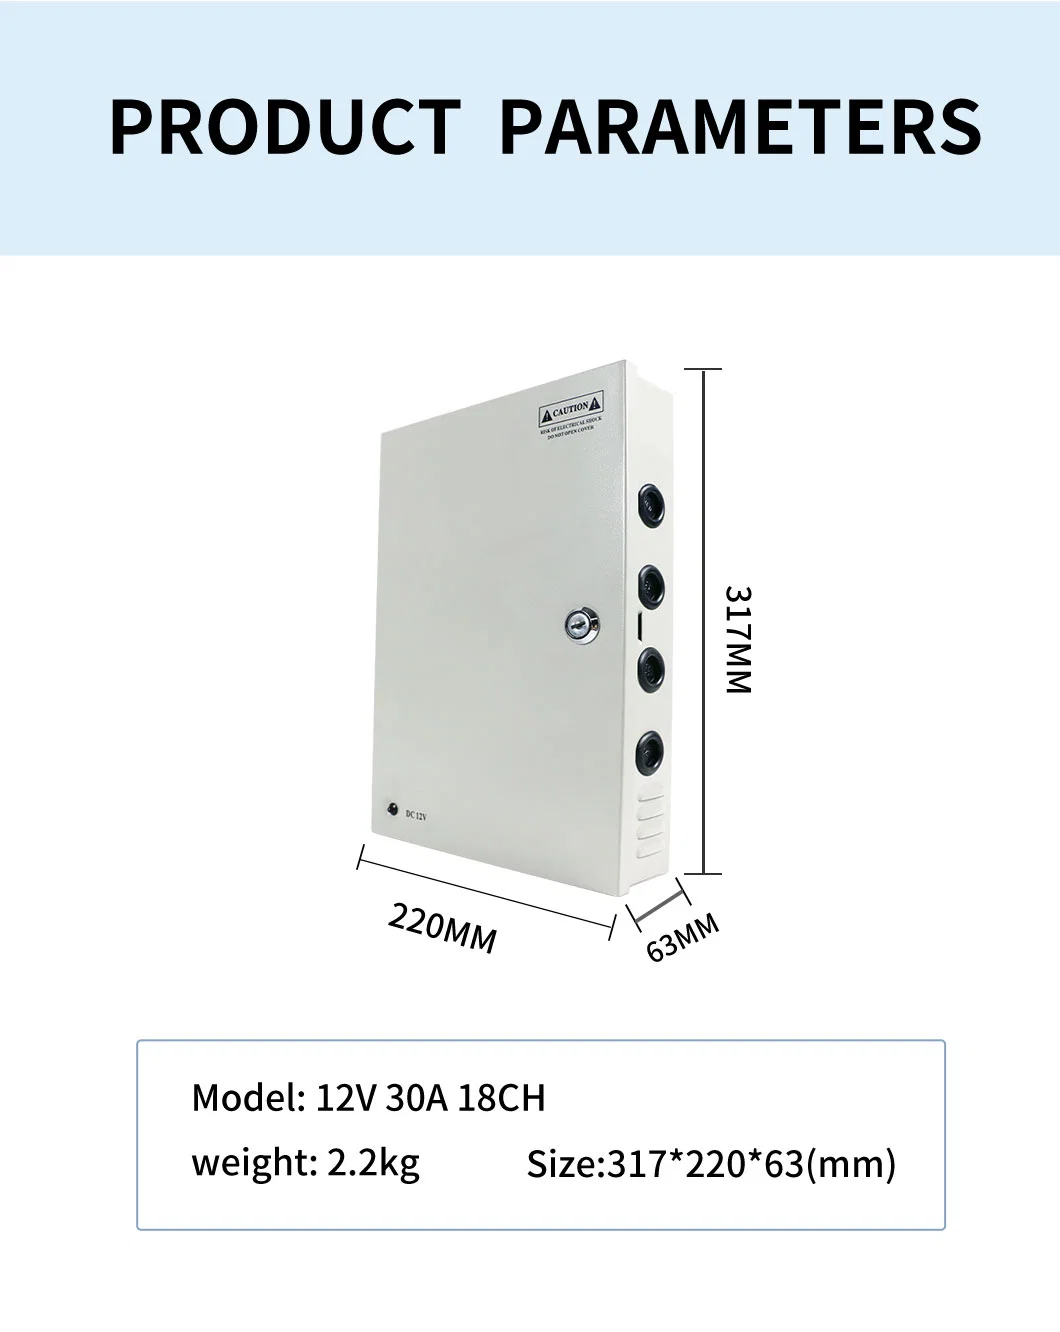 The Shampower 12V 30A 18 Fused Outputs CCTV Switching Power Supply for Security CCTV Camera